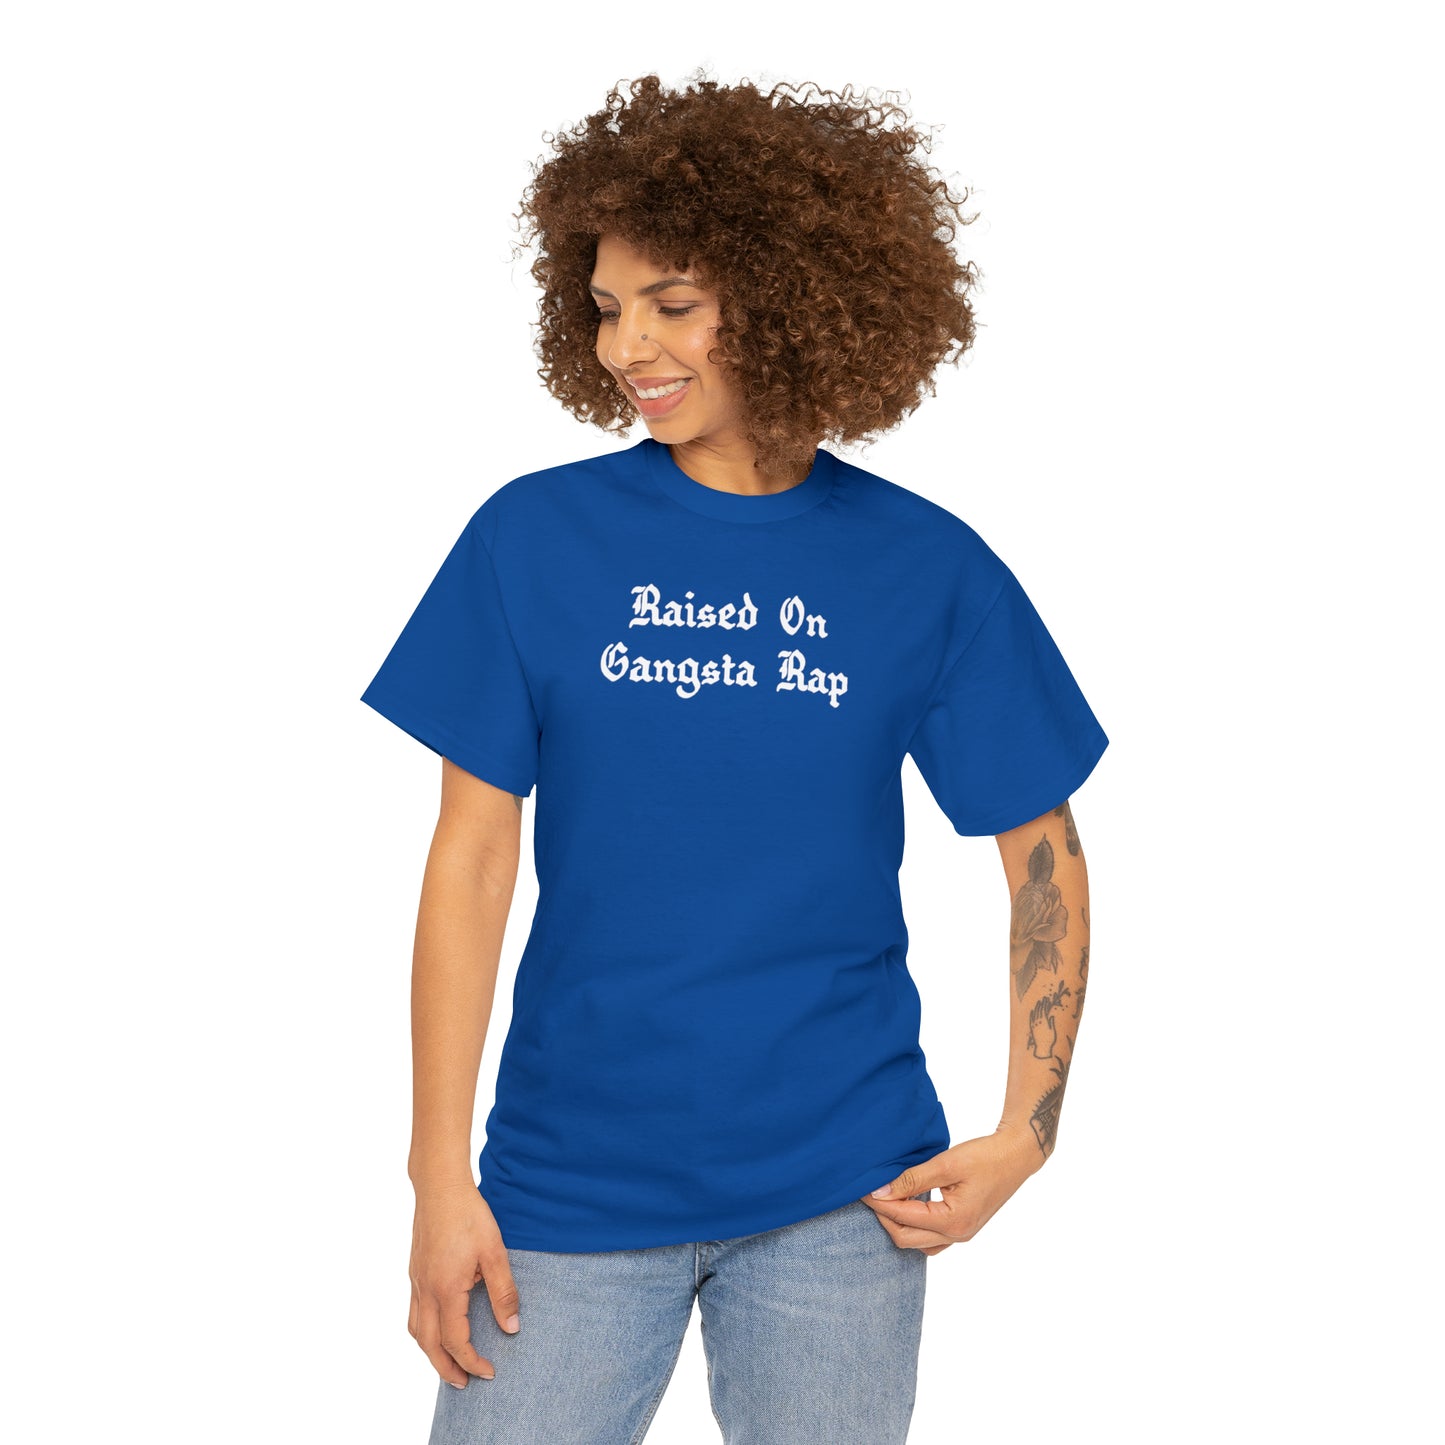 Raised on Gangsta Rap Shirt Great gift for a Hip-Hop & Rap Lover T-Shirt, Rap T-Shirt, Gangsta Rap Tee